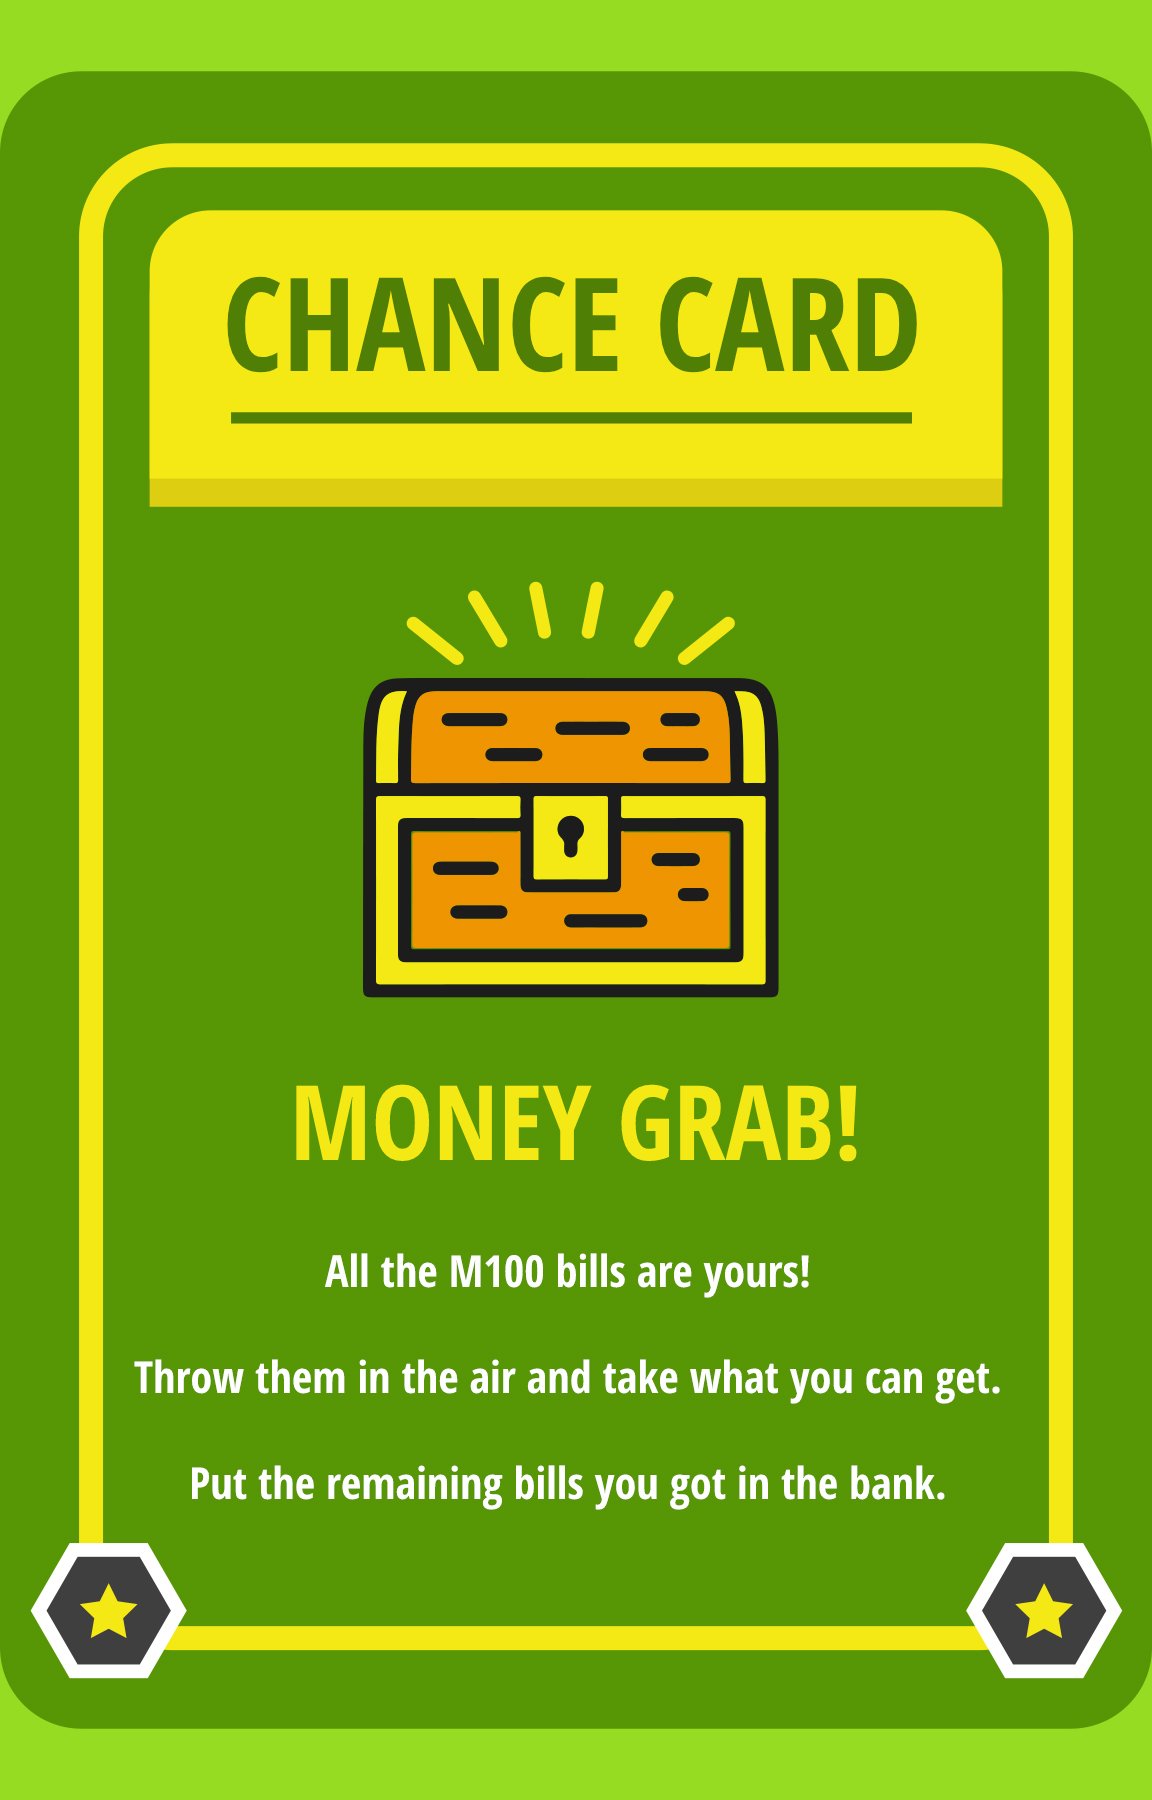 Free Monopoly Chance Card Template in PDF, Illustrator, PSD, SVG